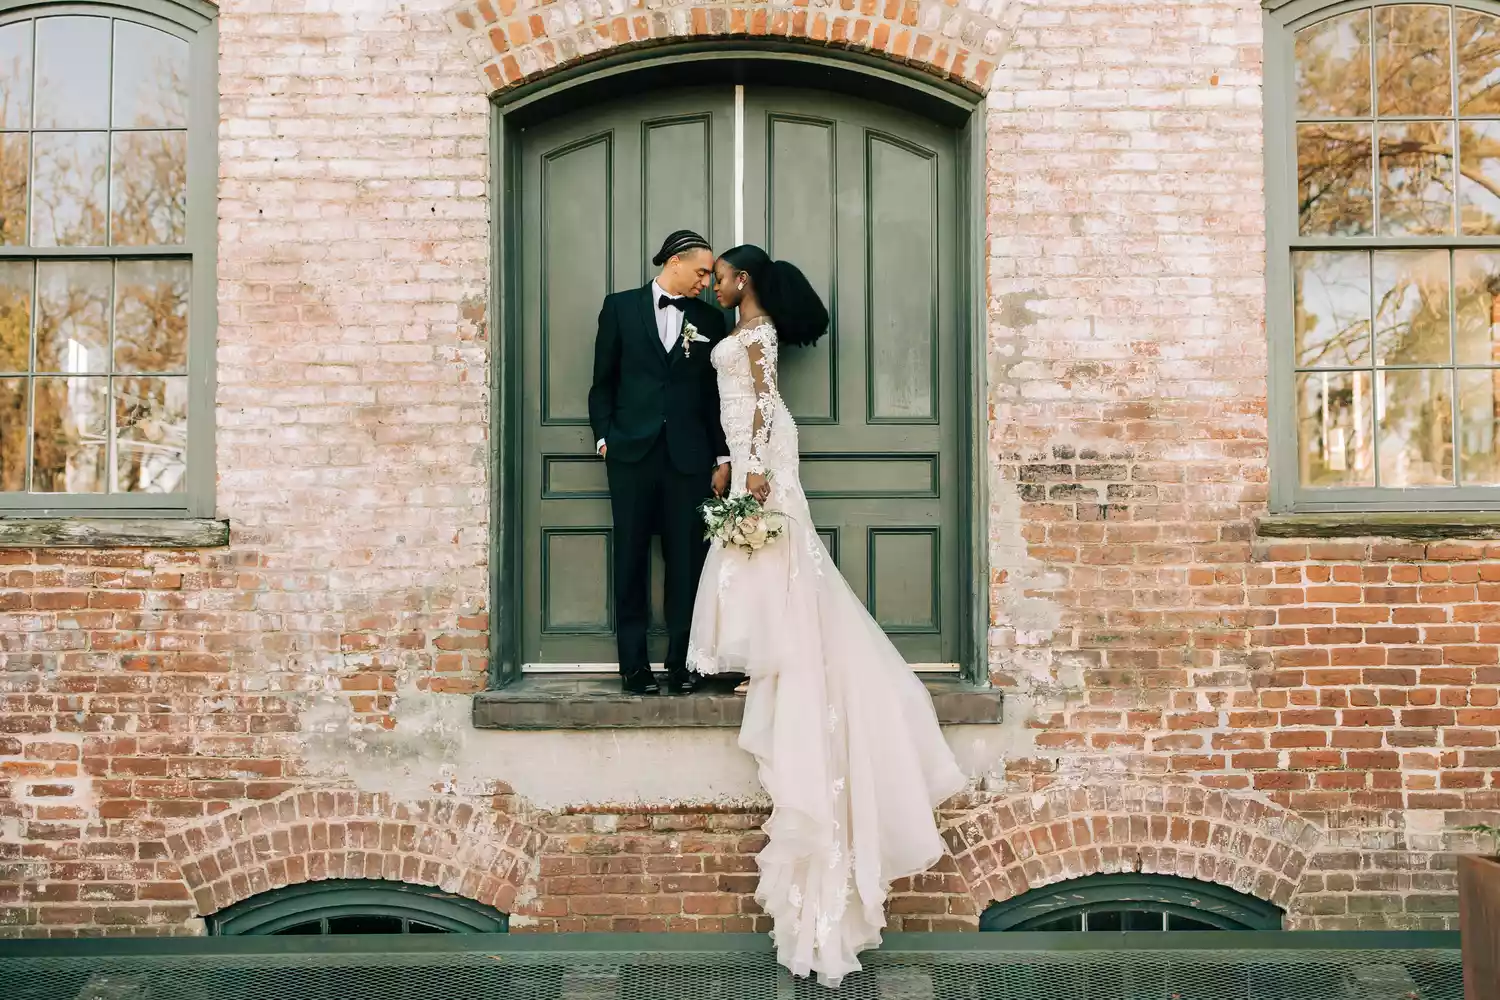 Bride and groom standing outside historic building during their wedding.